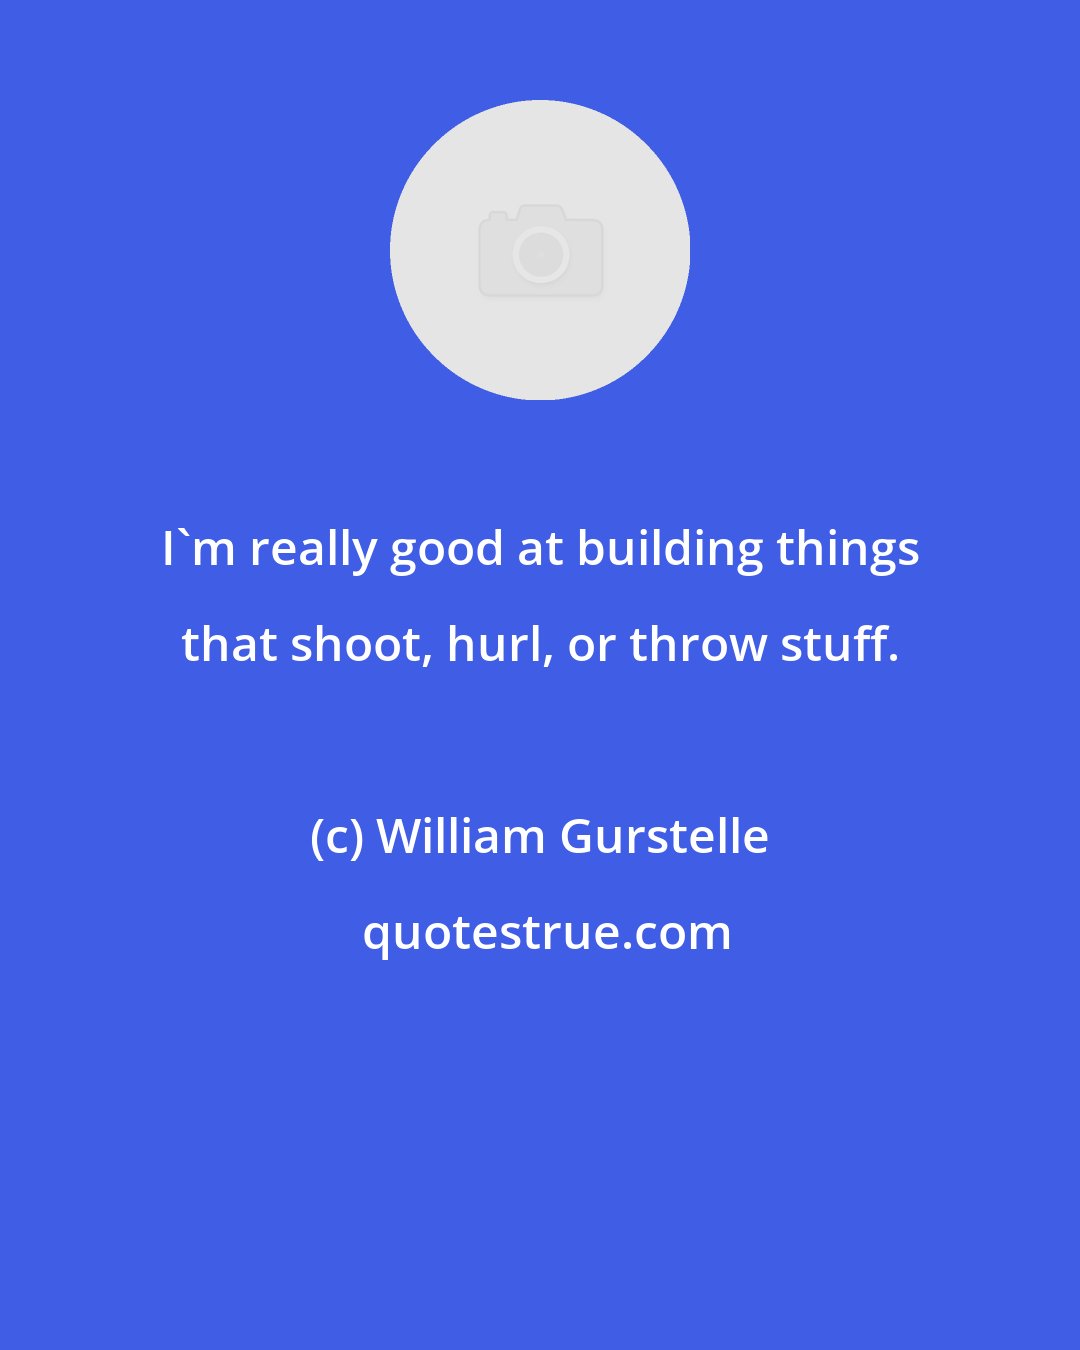 William Gurstelle: I'm really good at building things that shoot, hurl, or throw stuff.